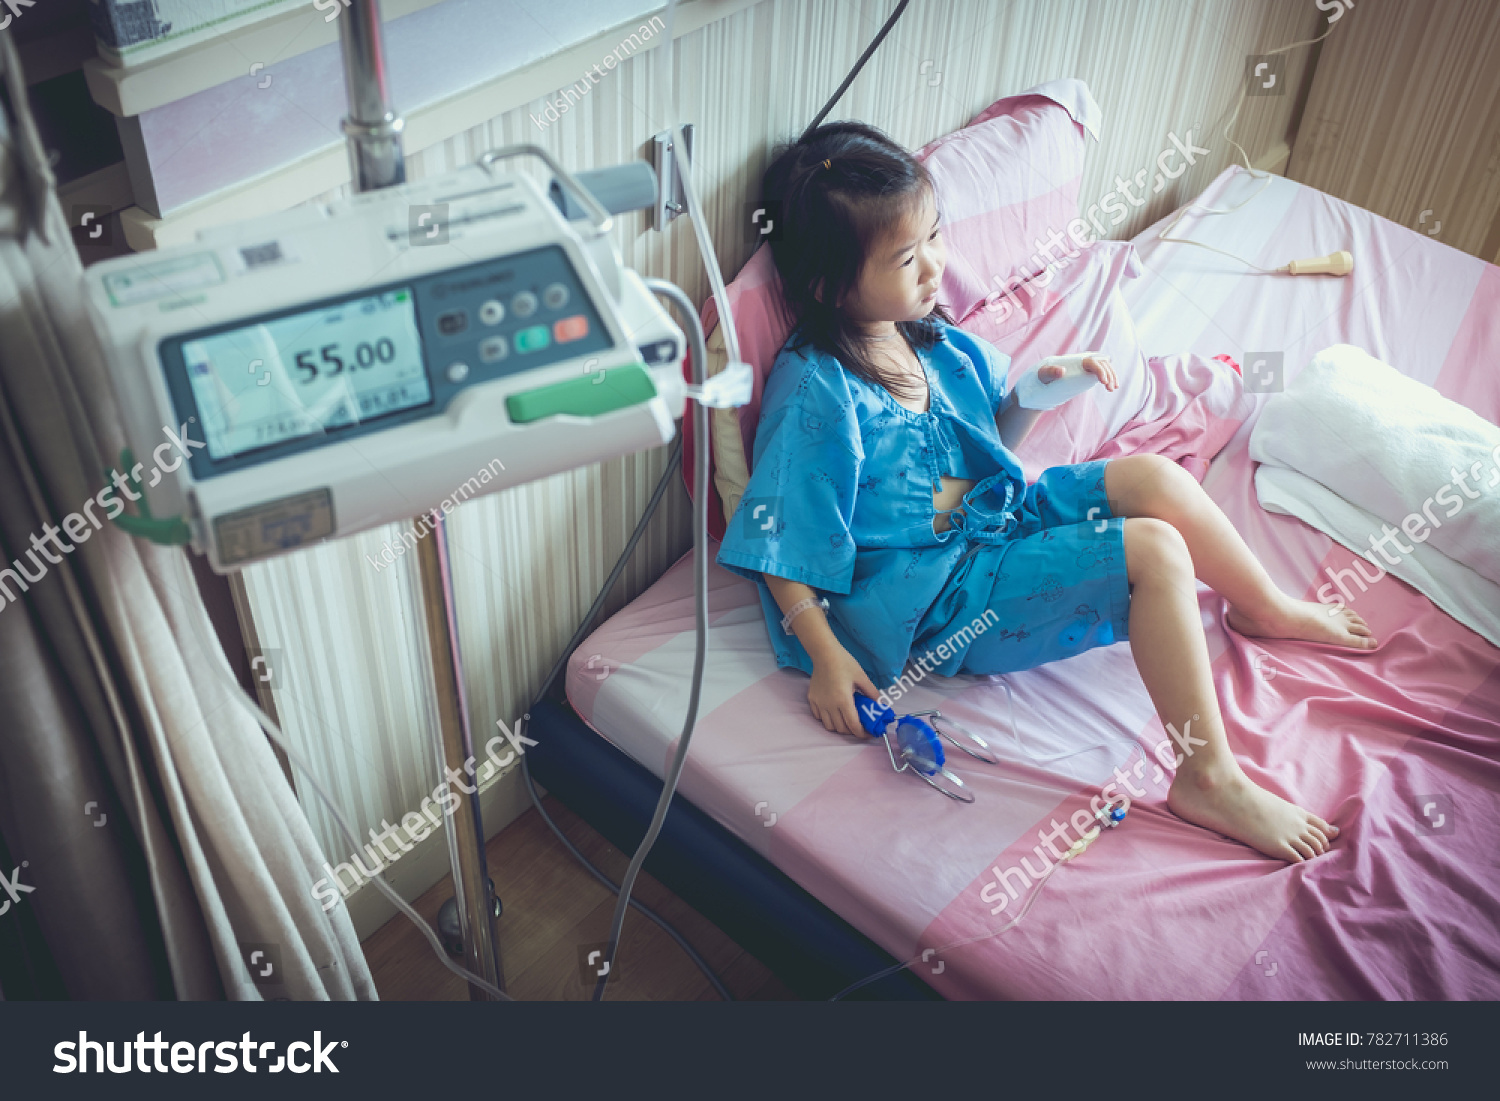 Illness asian girl admitted in hospital with infusion pump feeding IV drip. Shallow depth of field (DOF) child in focus, IV machine out of focus. Health care stories. Vintage film filter effect. #782711386